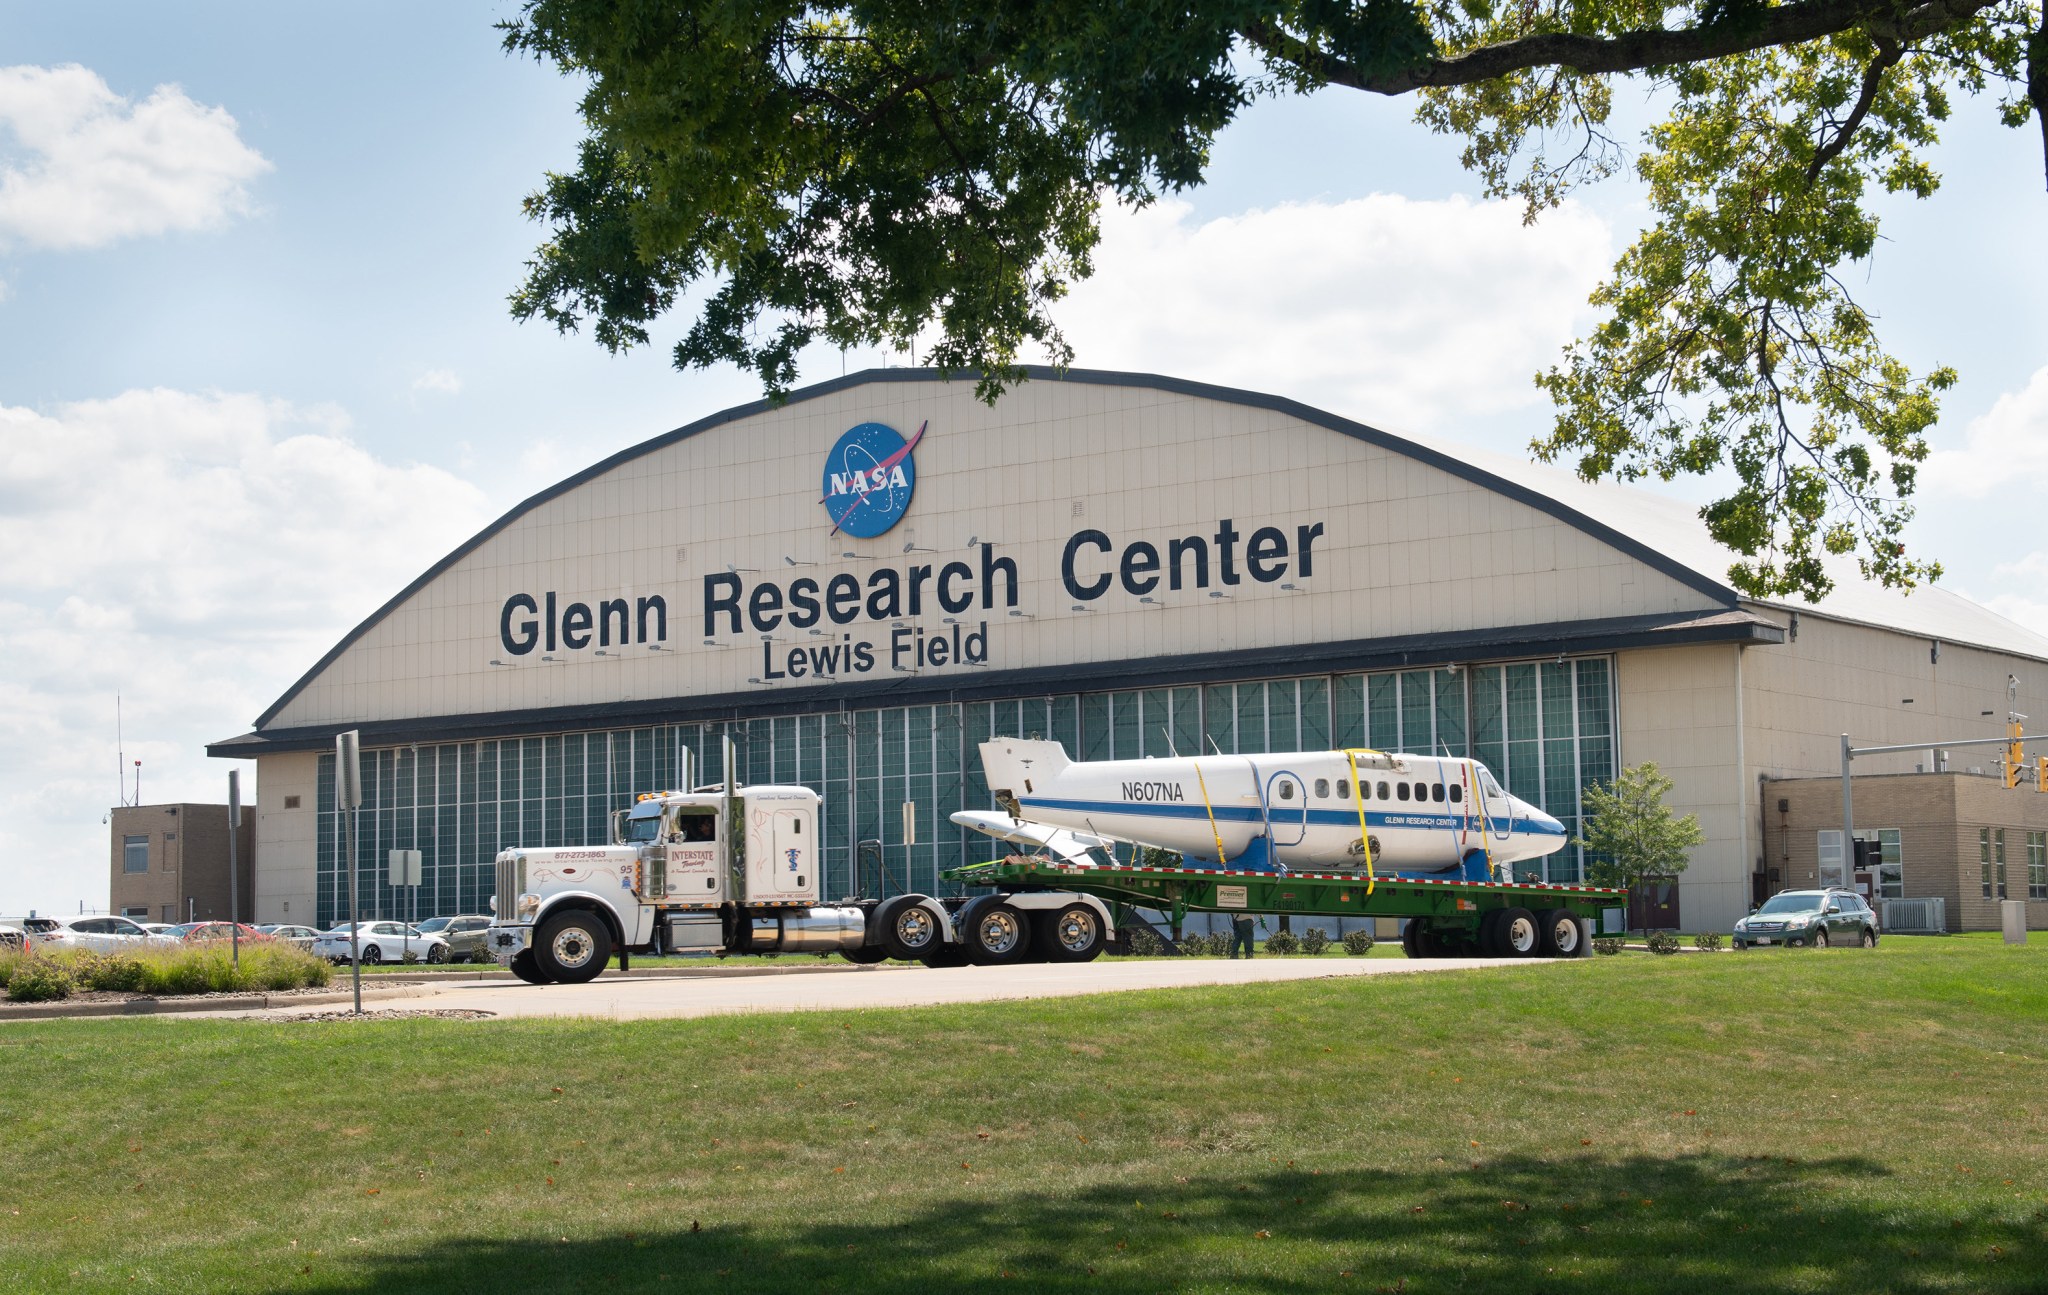 Body of aircraft sits on a flatbed attached to a truck in front of the NASA Glenn Research Center aircraft hangar.